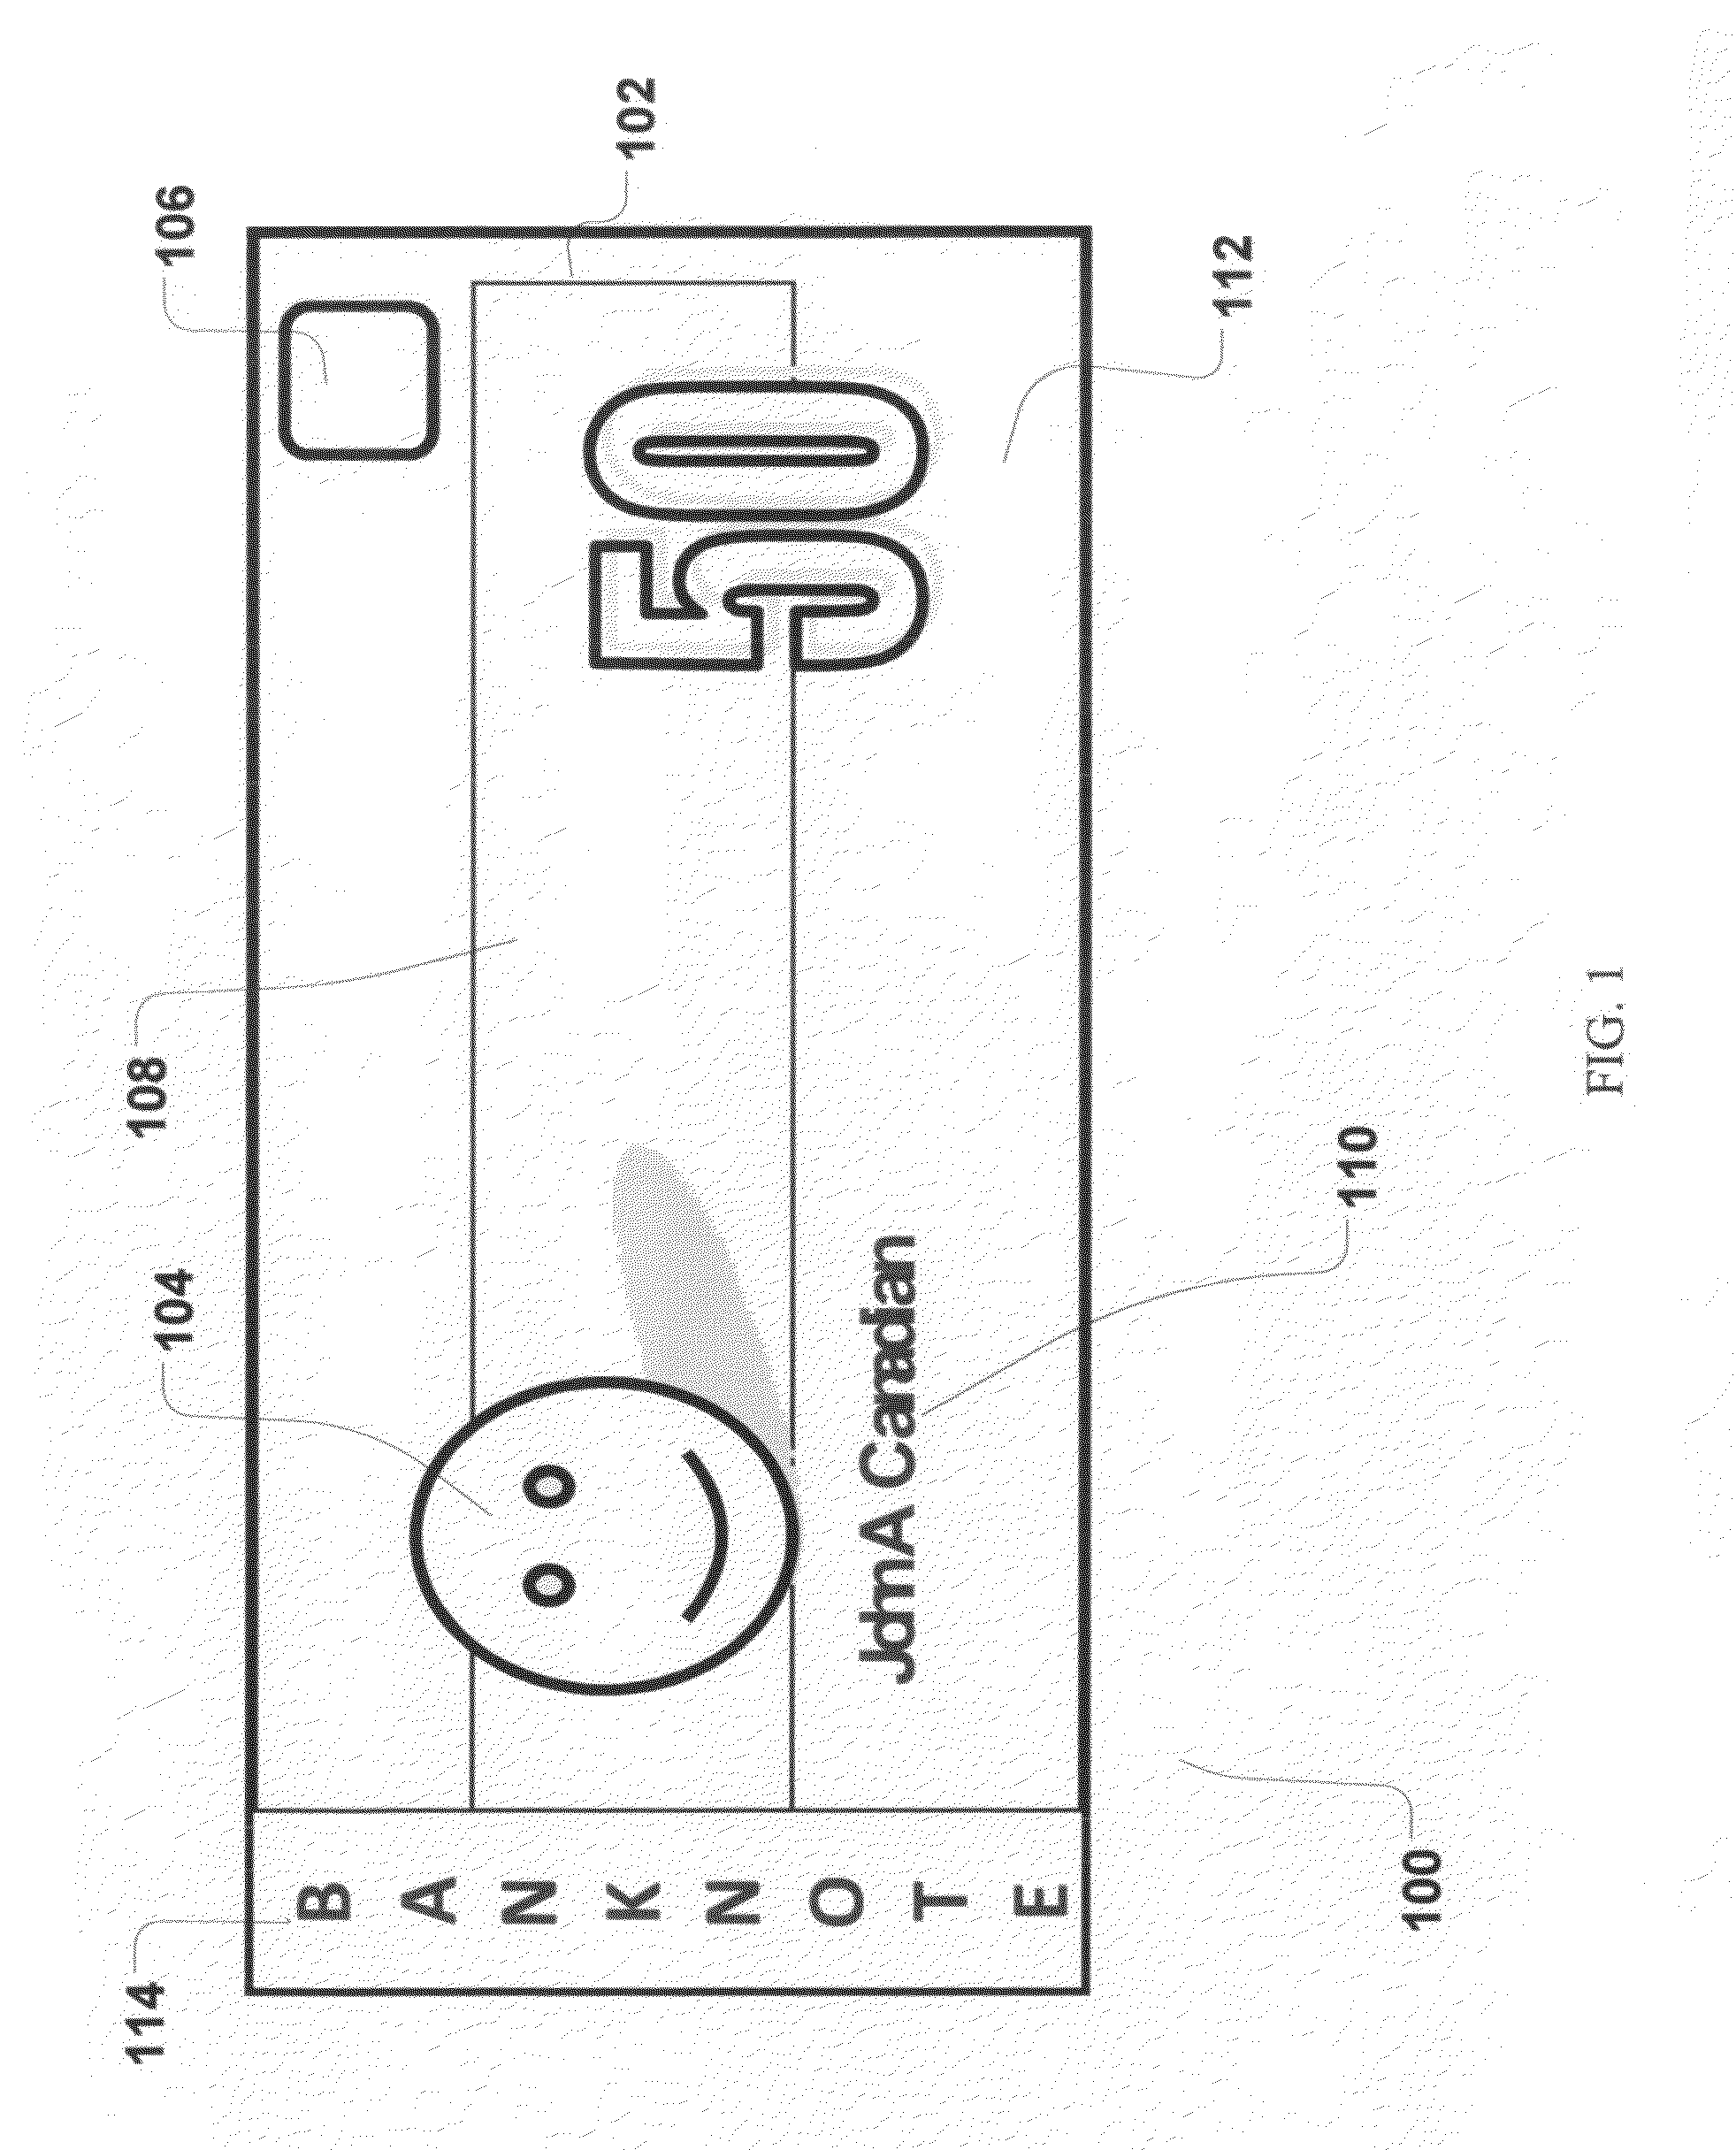 Security document with electroactive polymer power source and nano-optical display